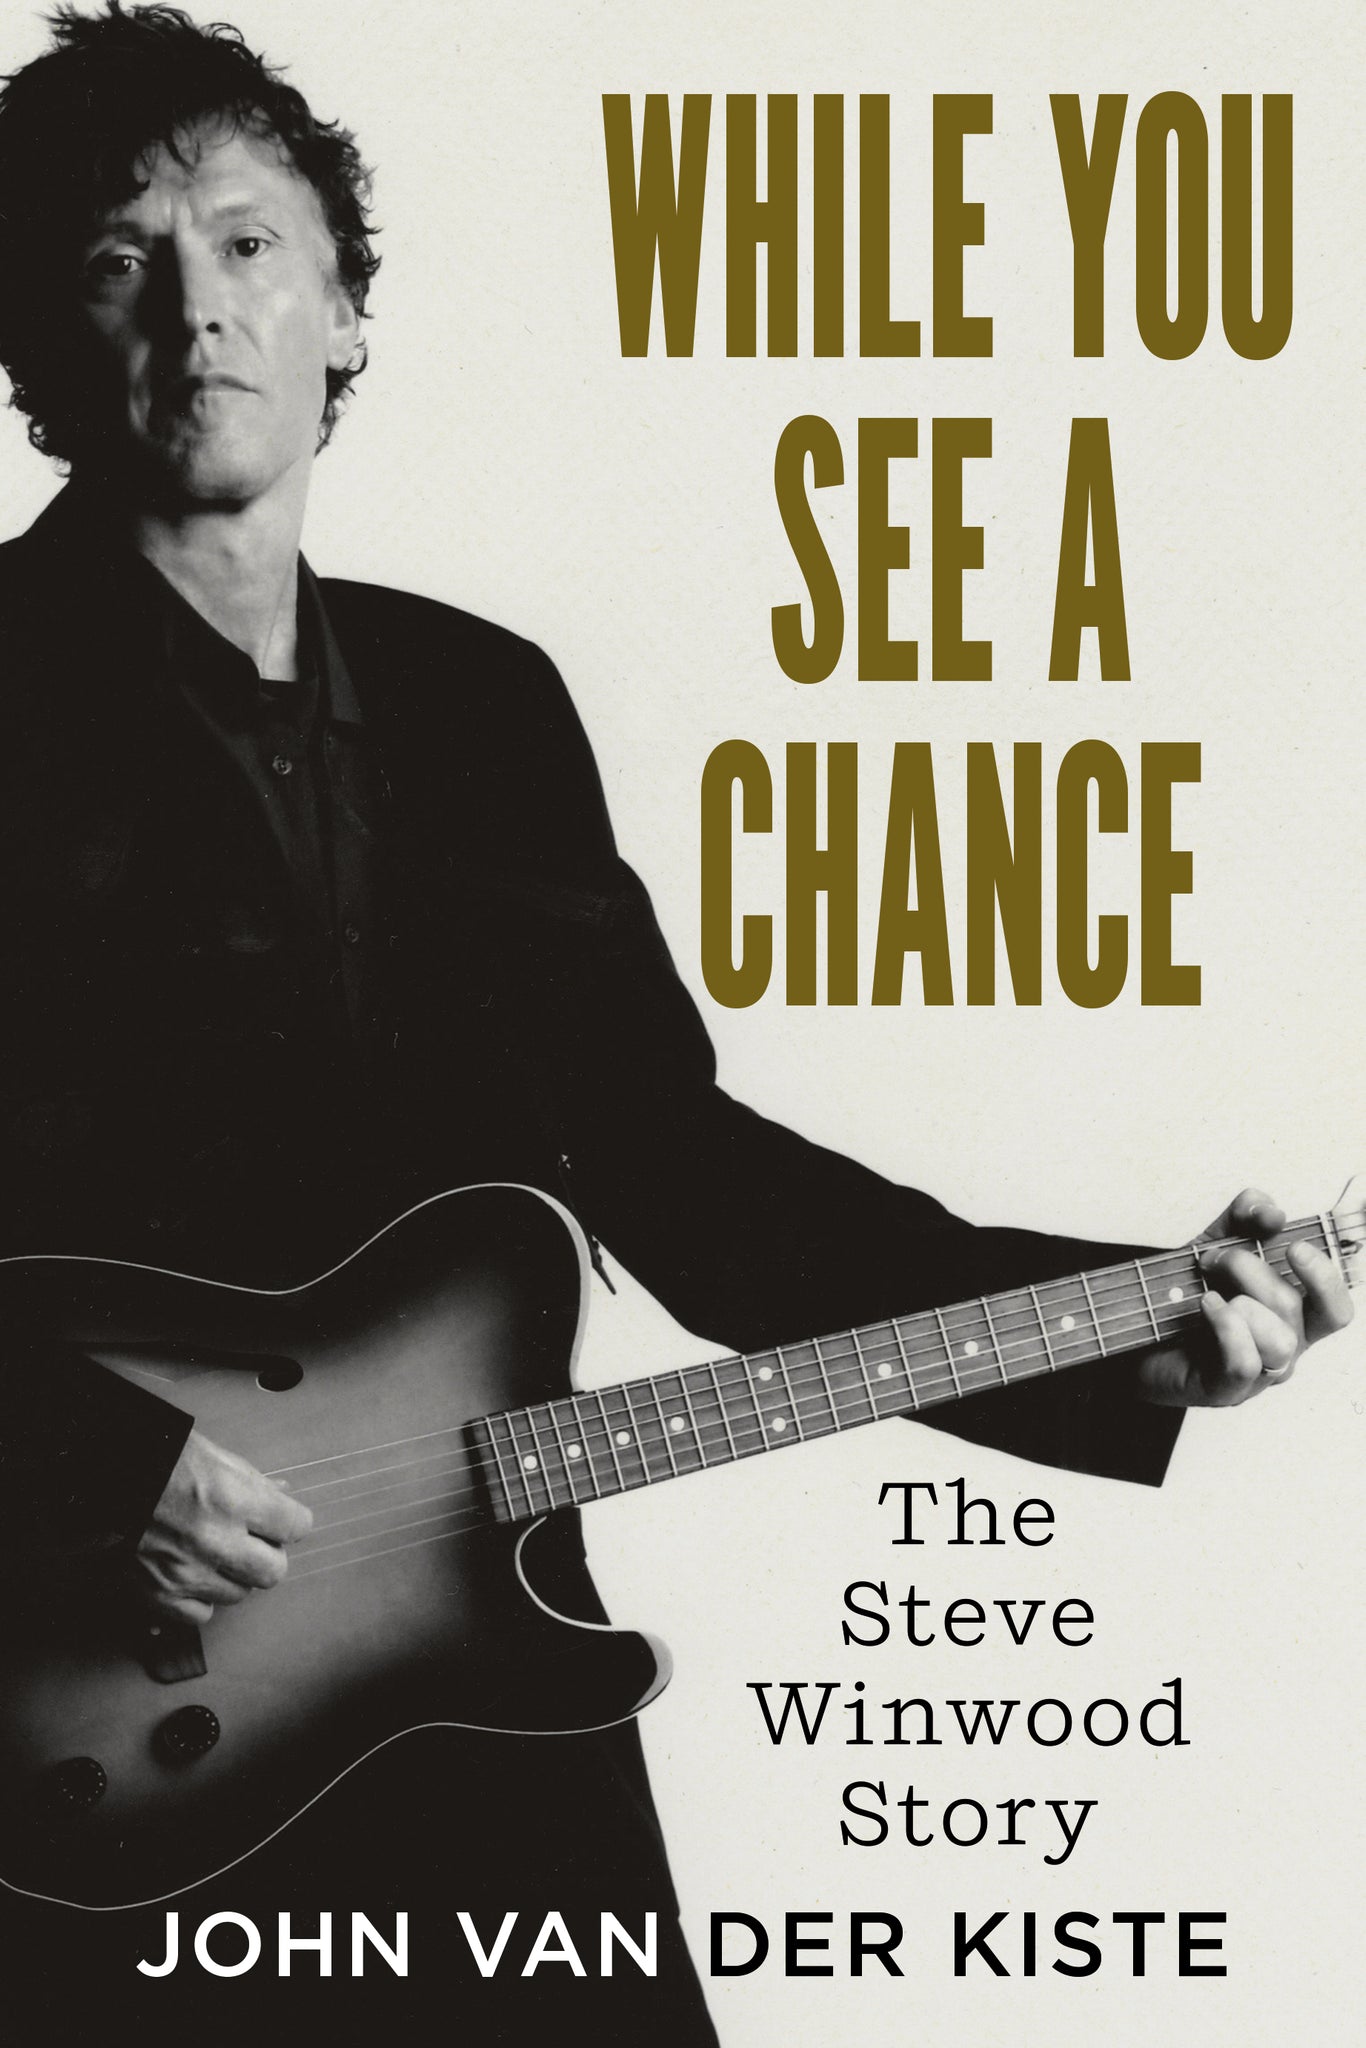 While You See a Chance: The Steve Winwood Story - available now from Fonthill Media